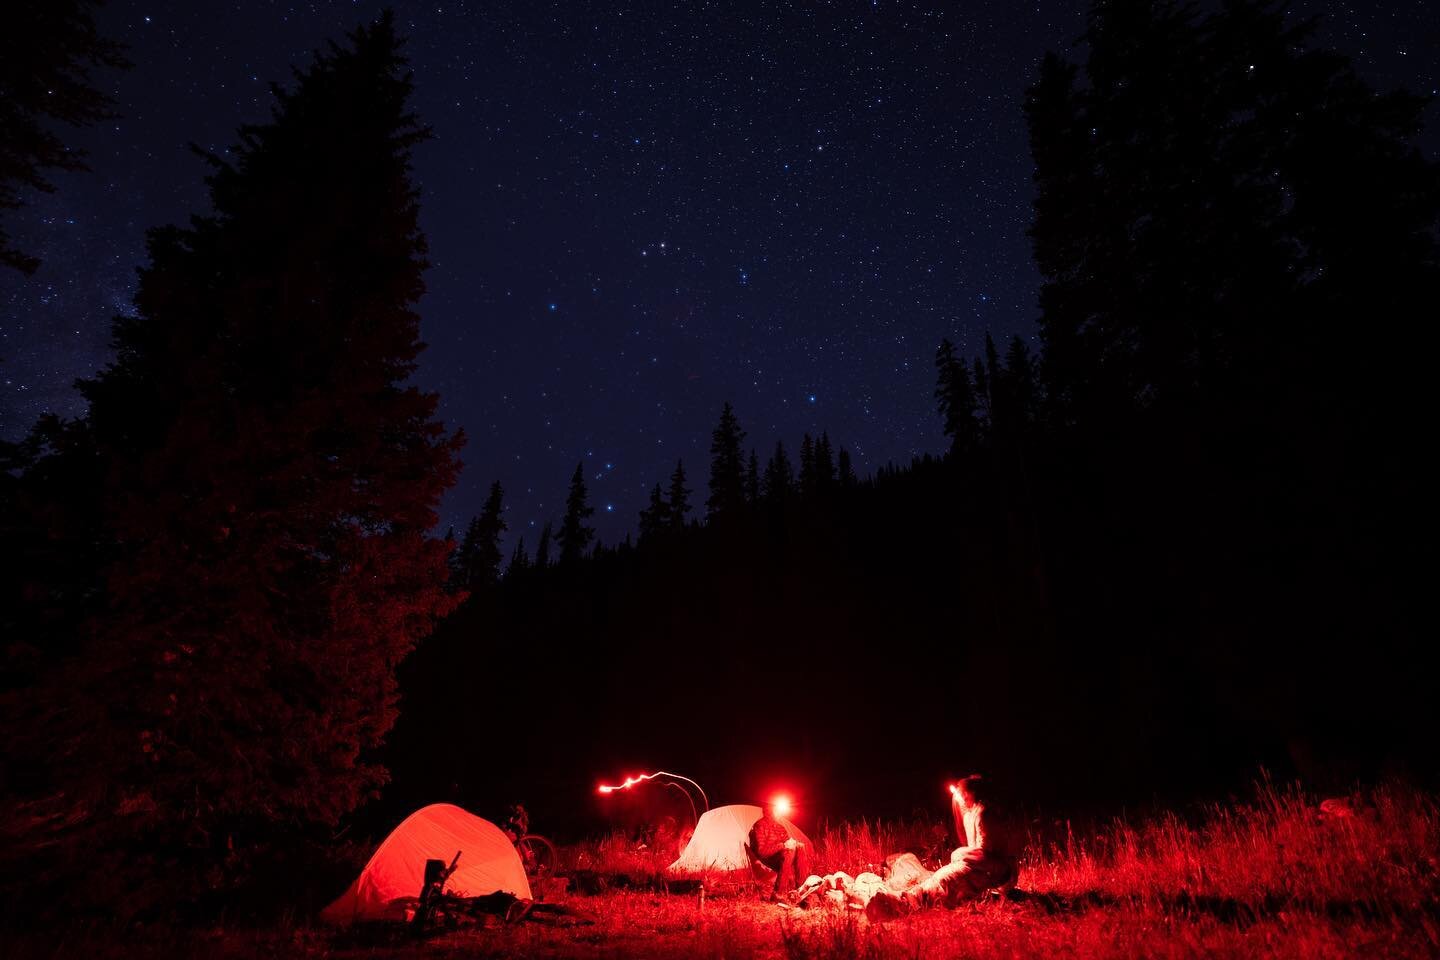 Crested Butte under the stars
&bull;
📸: @sonyalpha A7 IV 
&bull; Sony 20mm 1.8 
&bull; ISO 1600
&bull; f / 1.8
&bull; 15 seconds
&bull;
#lazyshutters #pedalfurther #melaninbasecamp #visitgcb